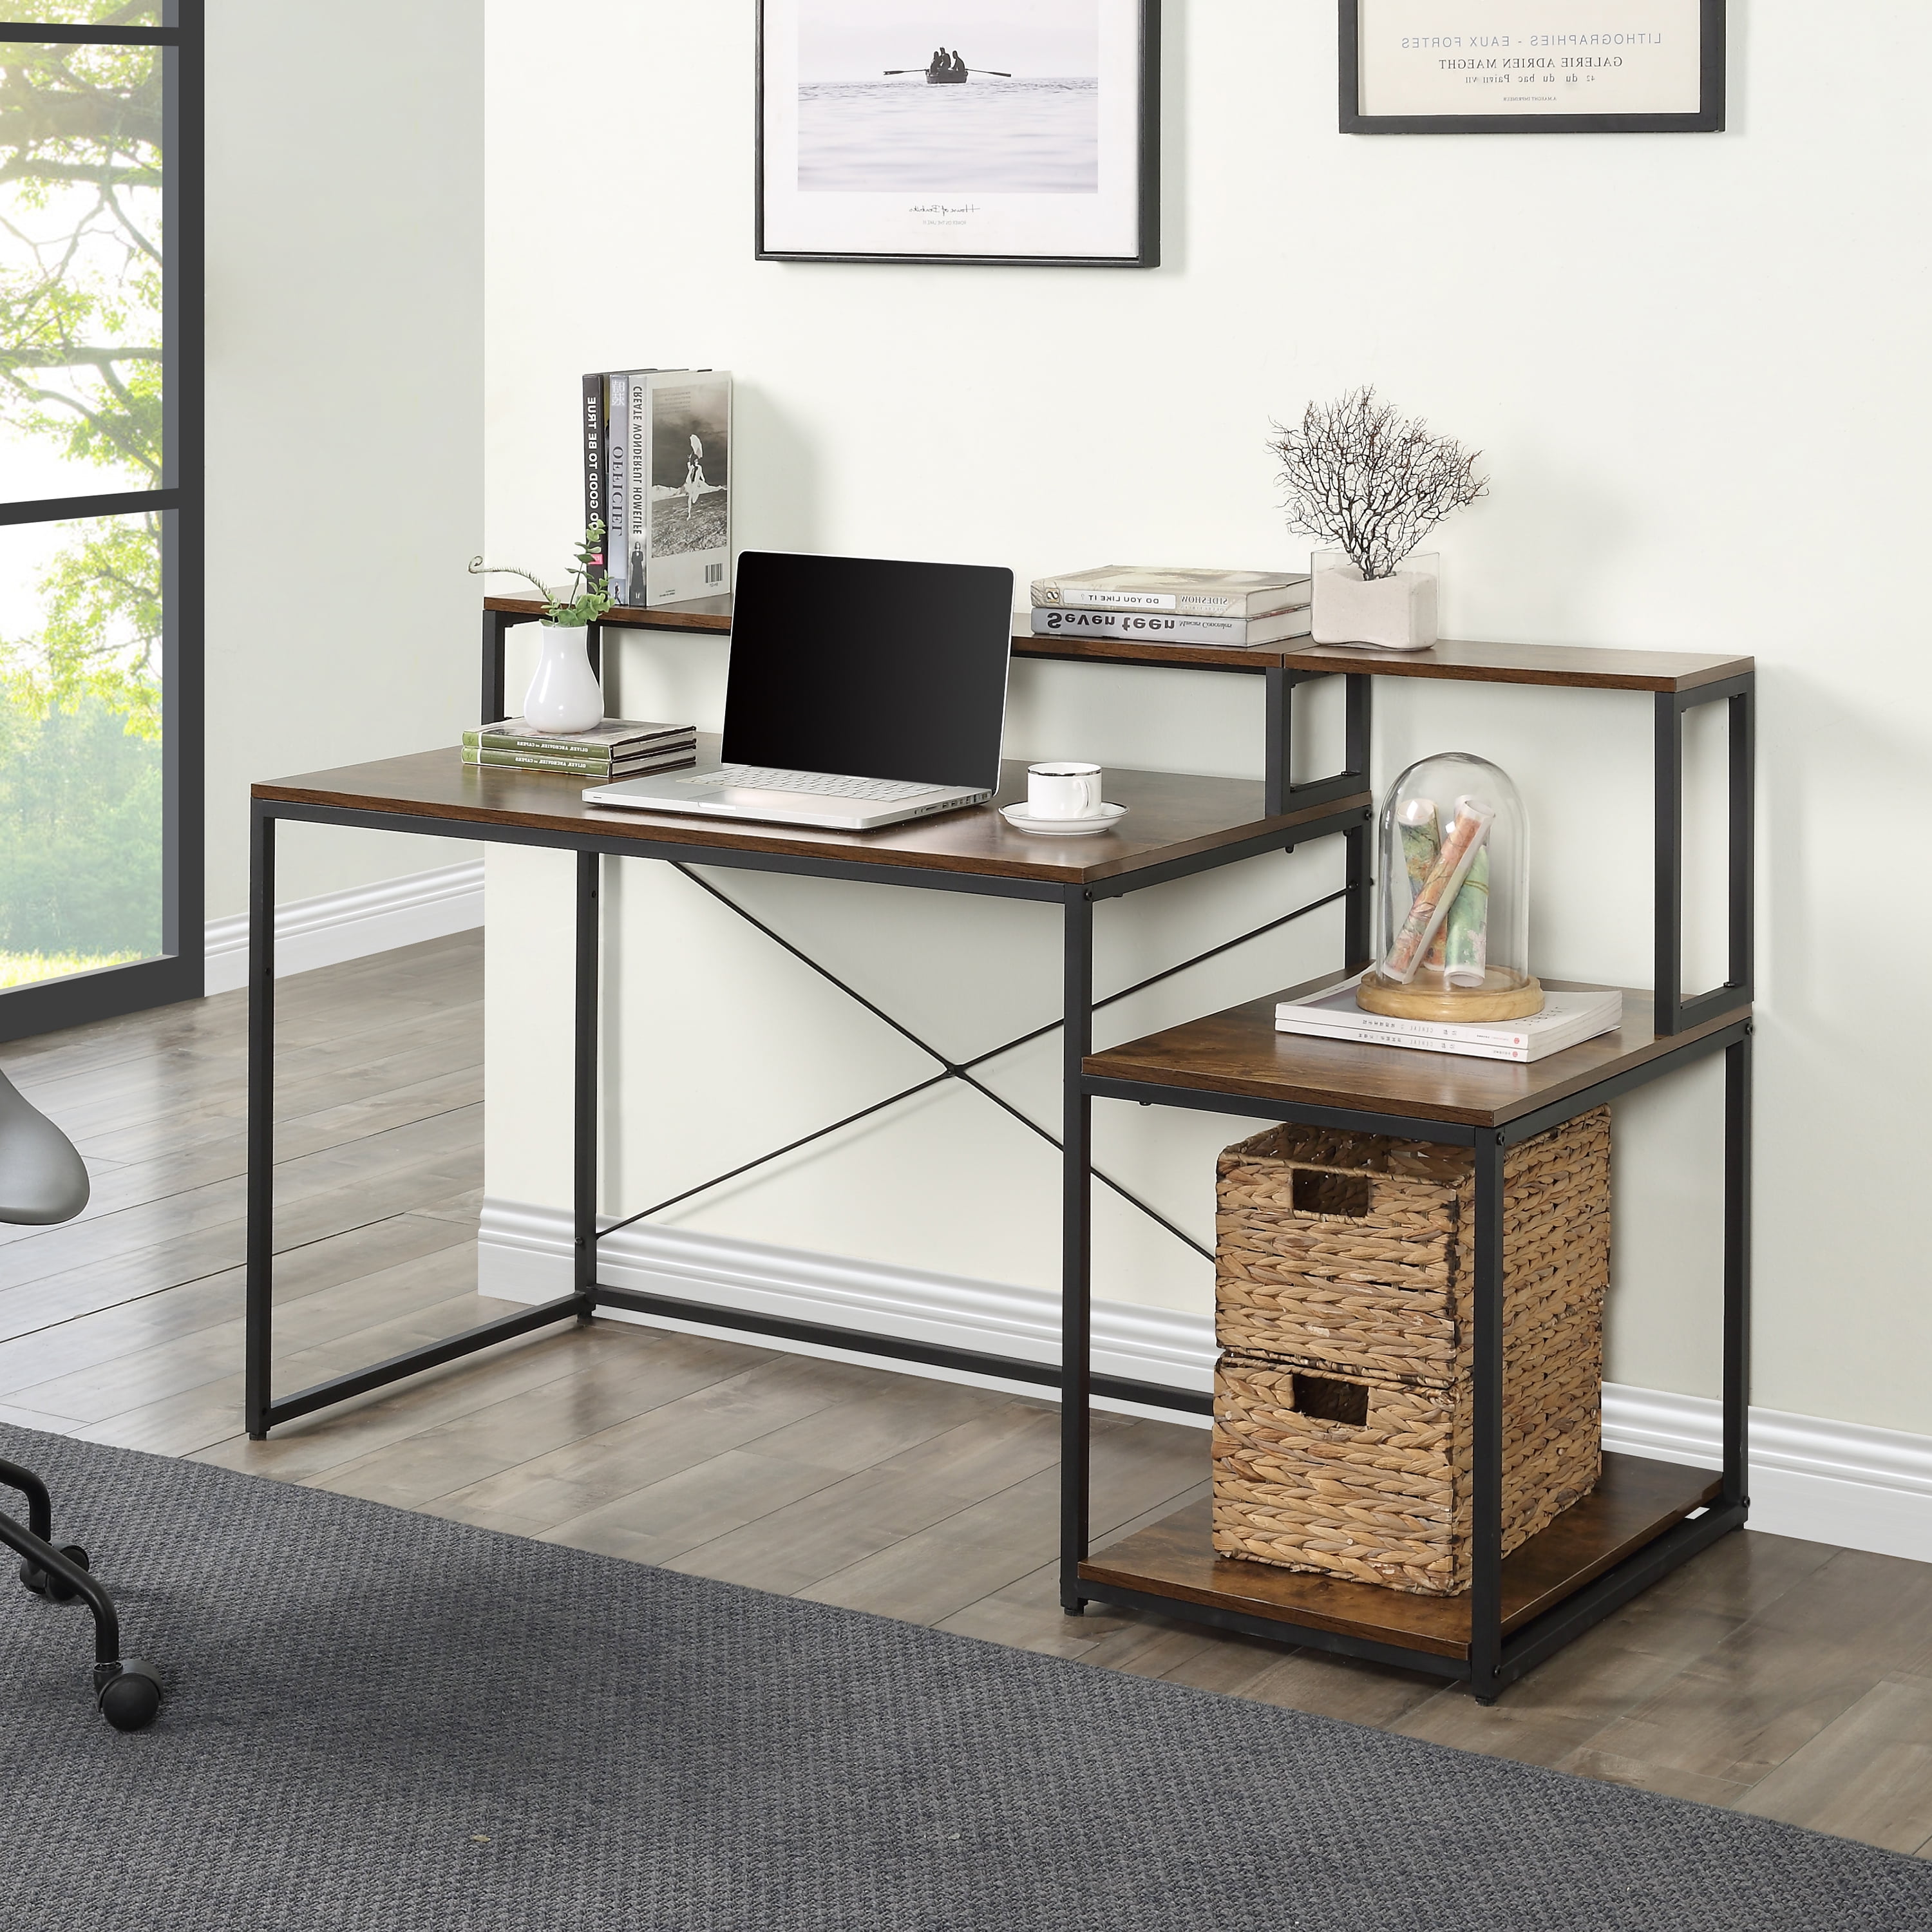 Details about   Wood Computer Desk Writing PC Laptop Table Workstation Study Shelf Home Office H 